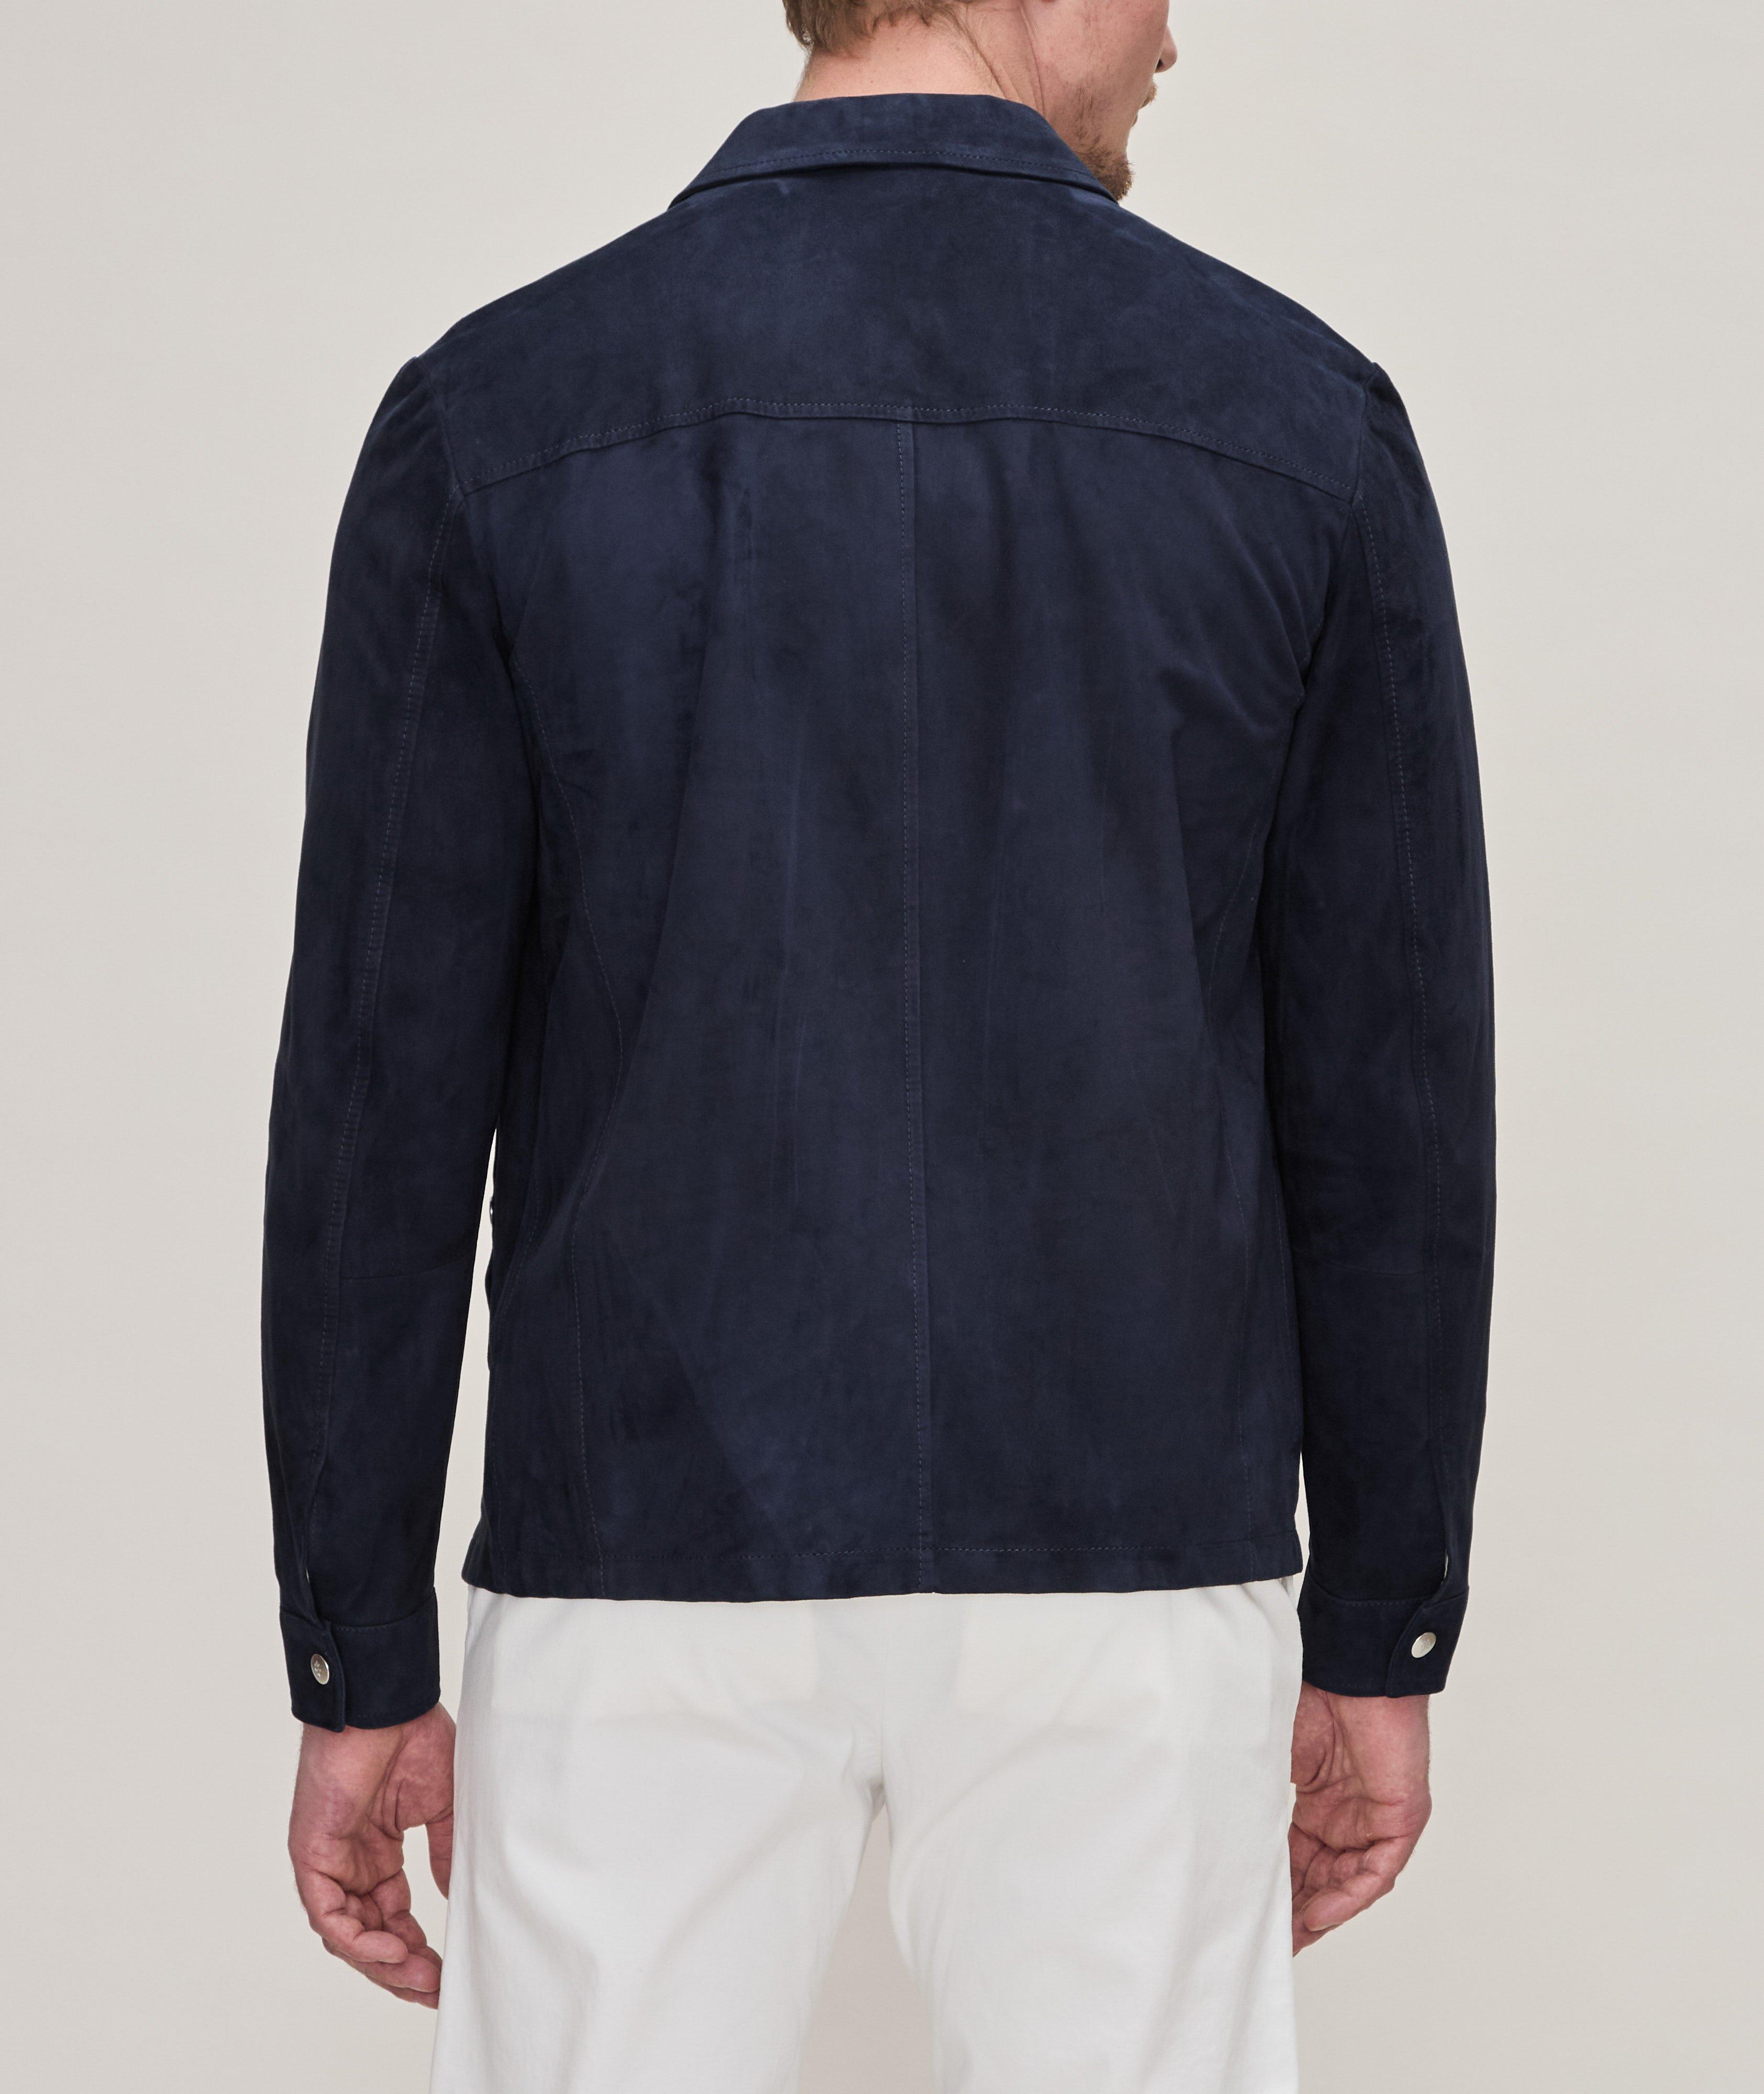 Platinum Collection Suede Field Jacket image 2